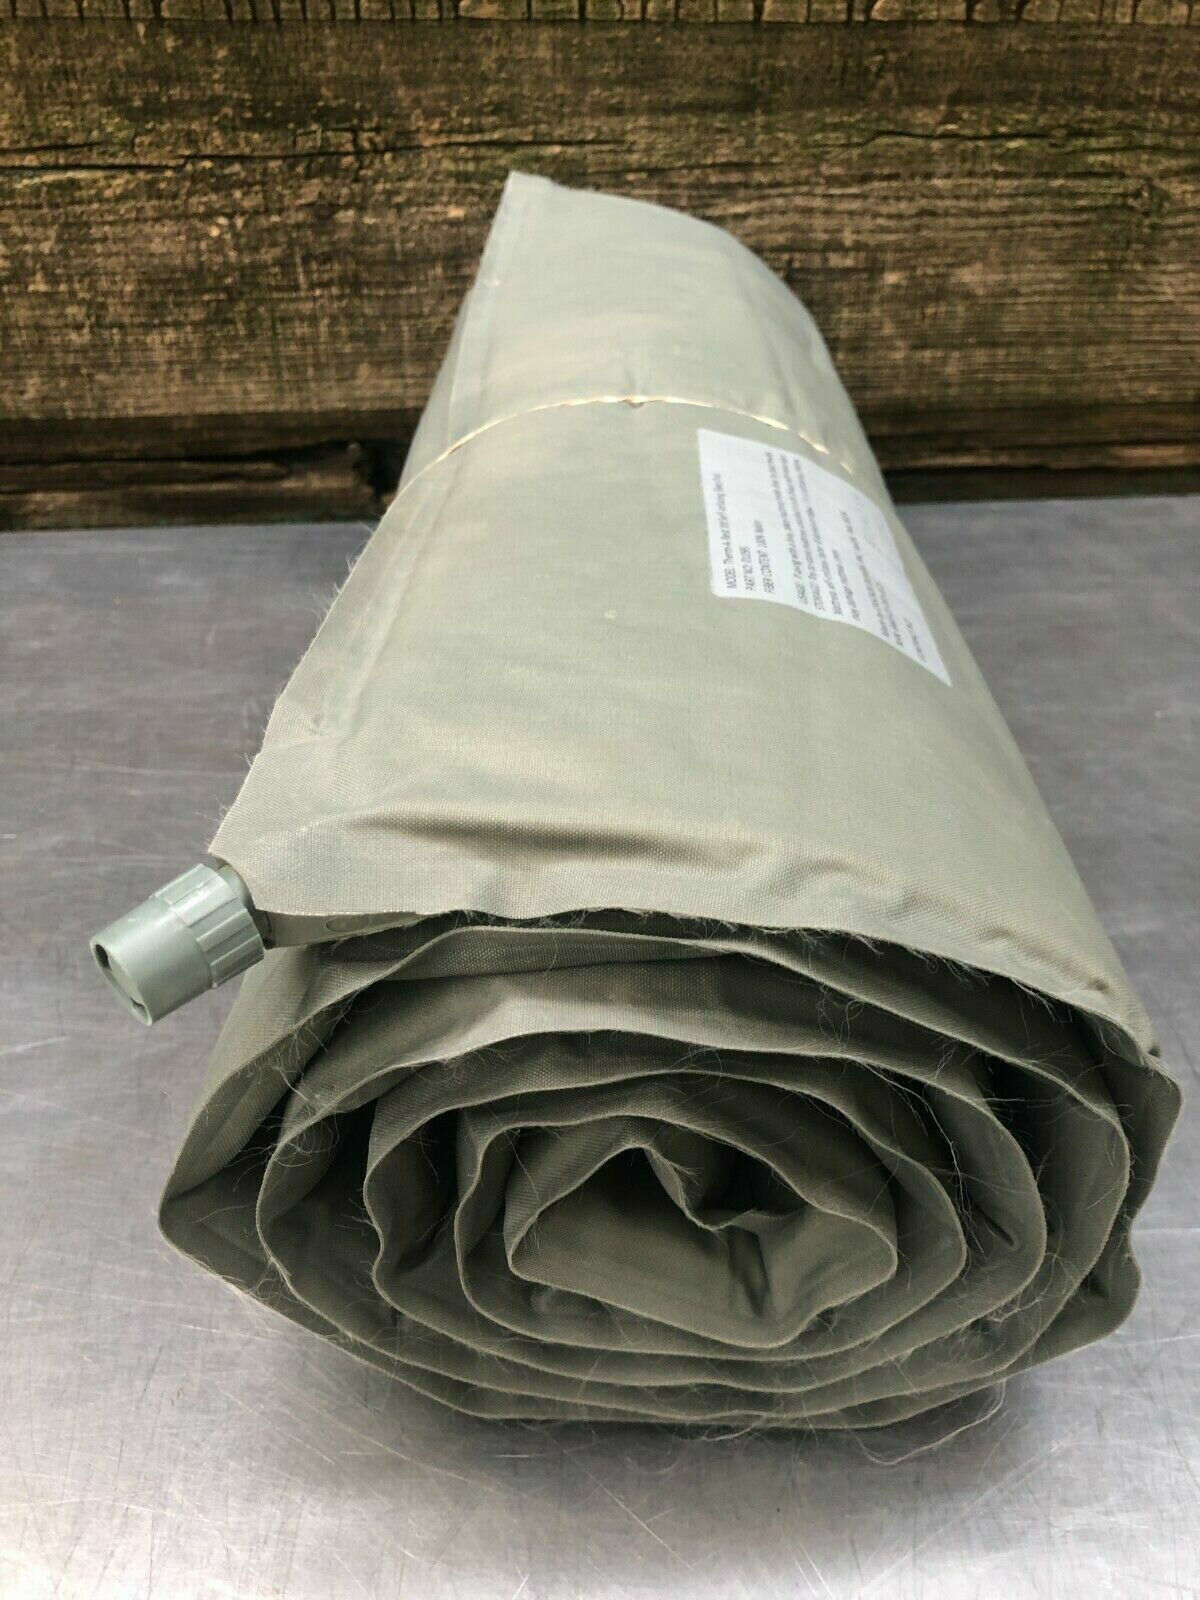 THERMAREST Camping SELF INFLATING SLEEPING PAD Mat FOLIAGE US Military LEAKS VGC